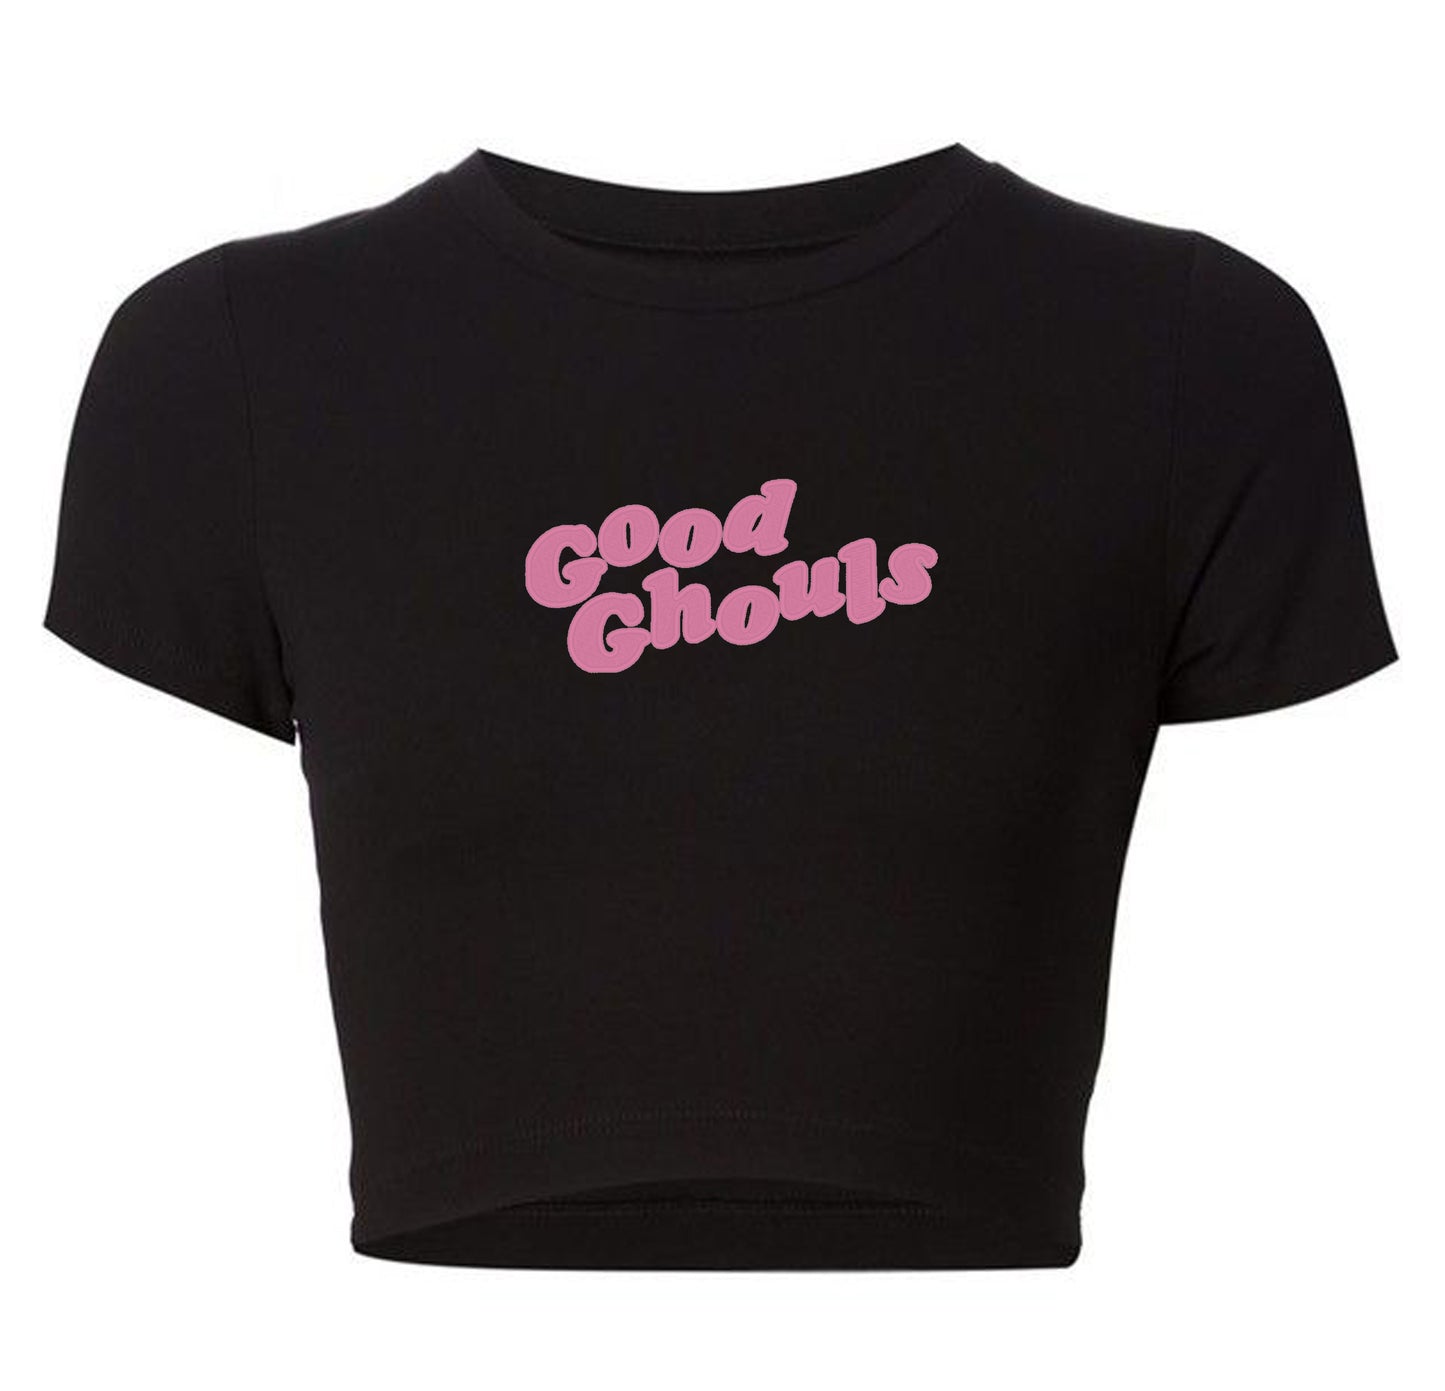 Good Ghouls Cropped Tee